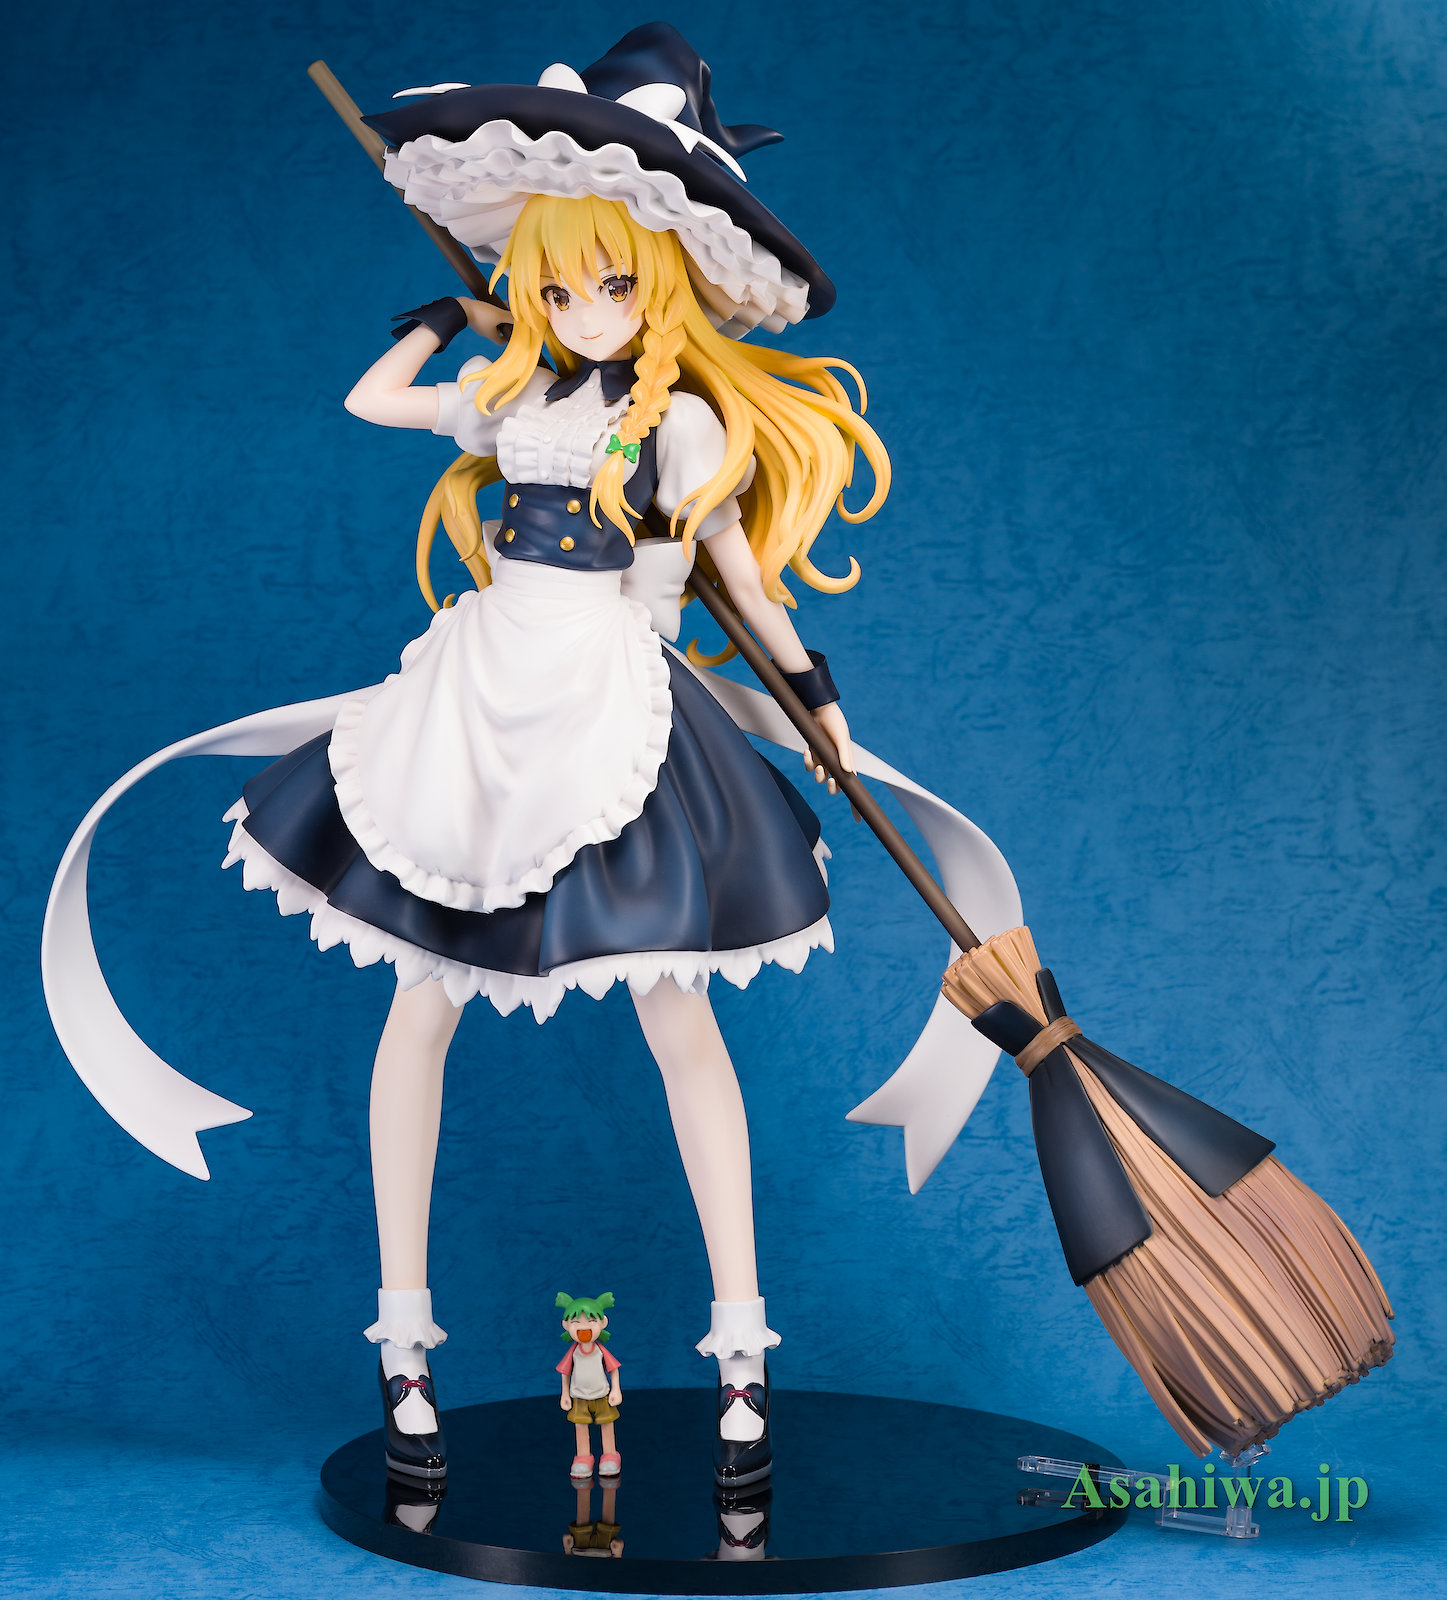 FREEing B-STYLE 霧雨魔理沙 東方Project よつばとフィギュアレビュー